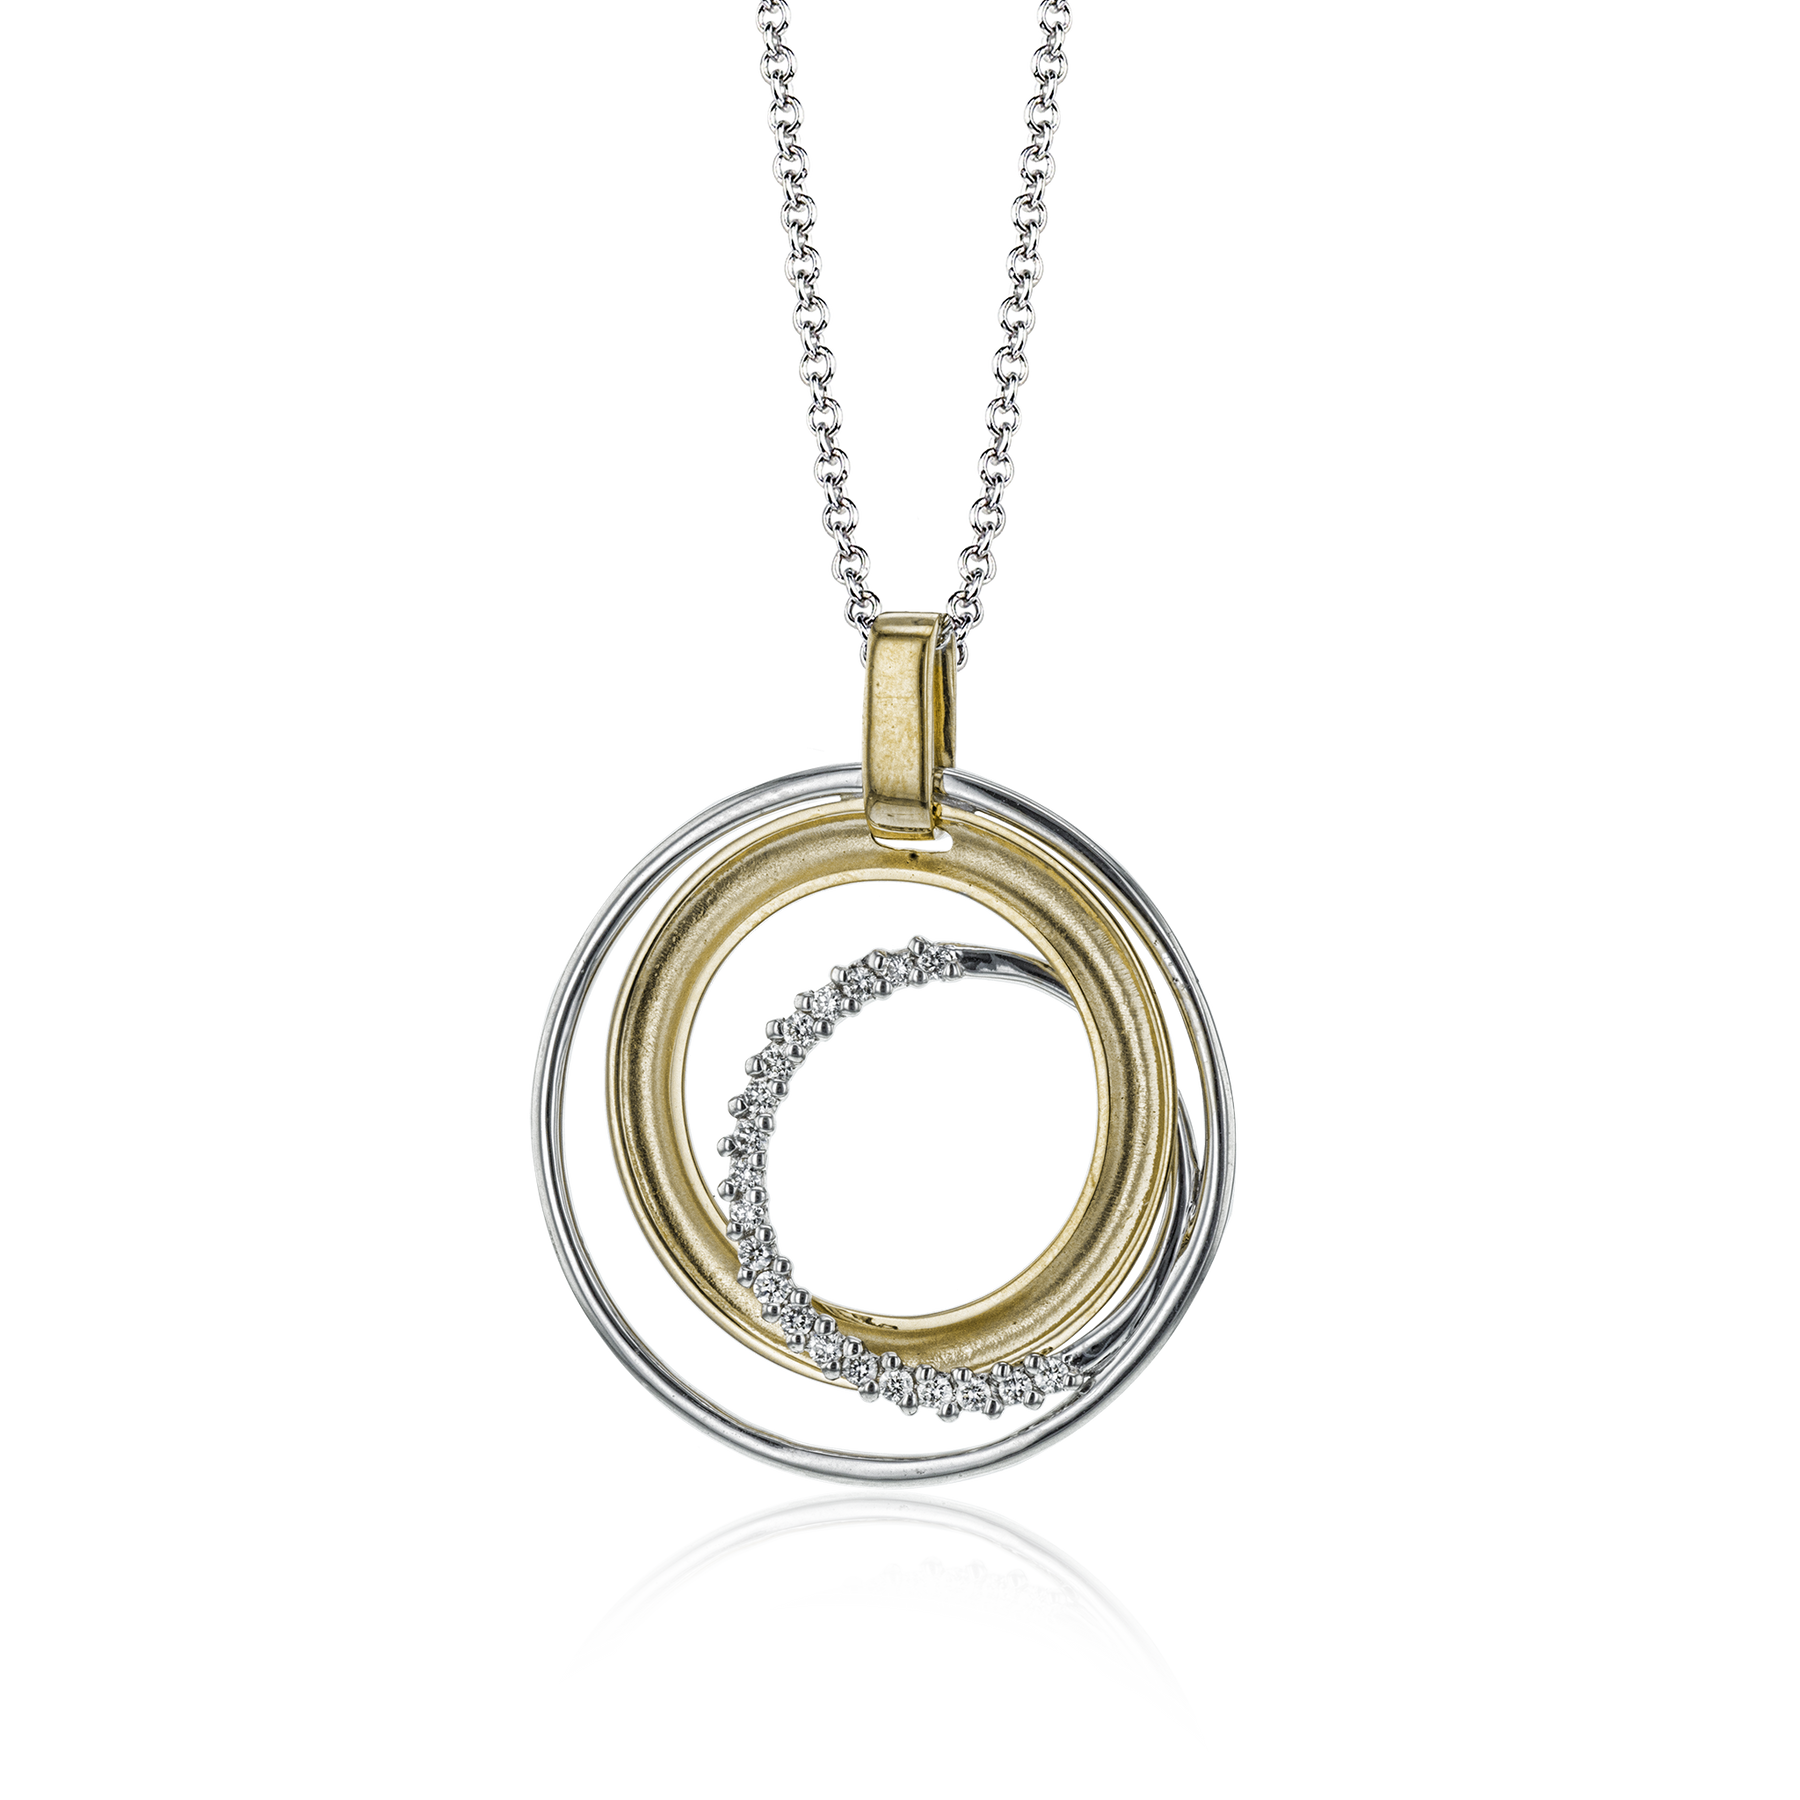 Clio Pendant Necklace in 18k Gold with Diamonds LP4464